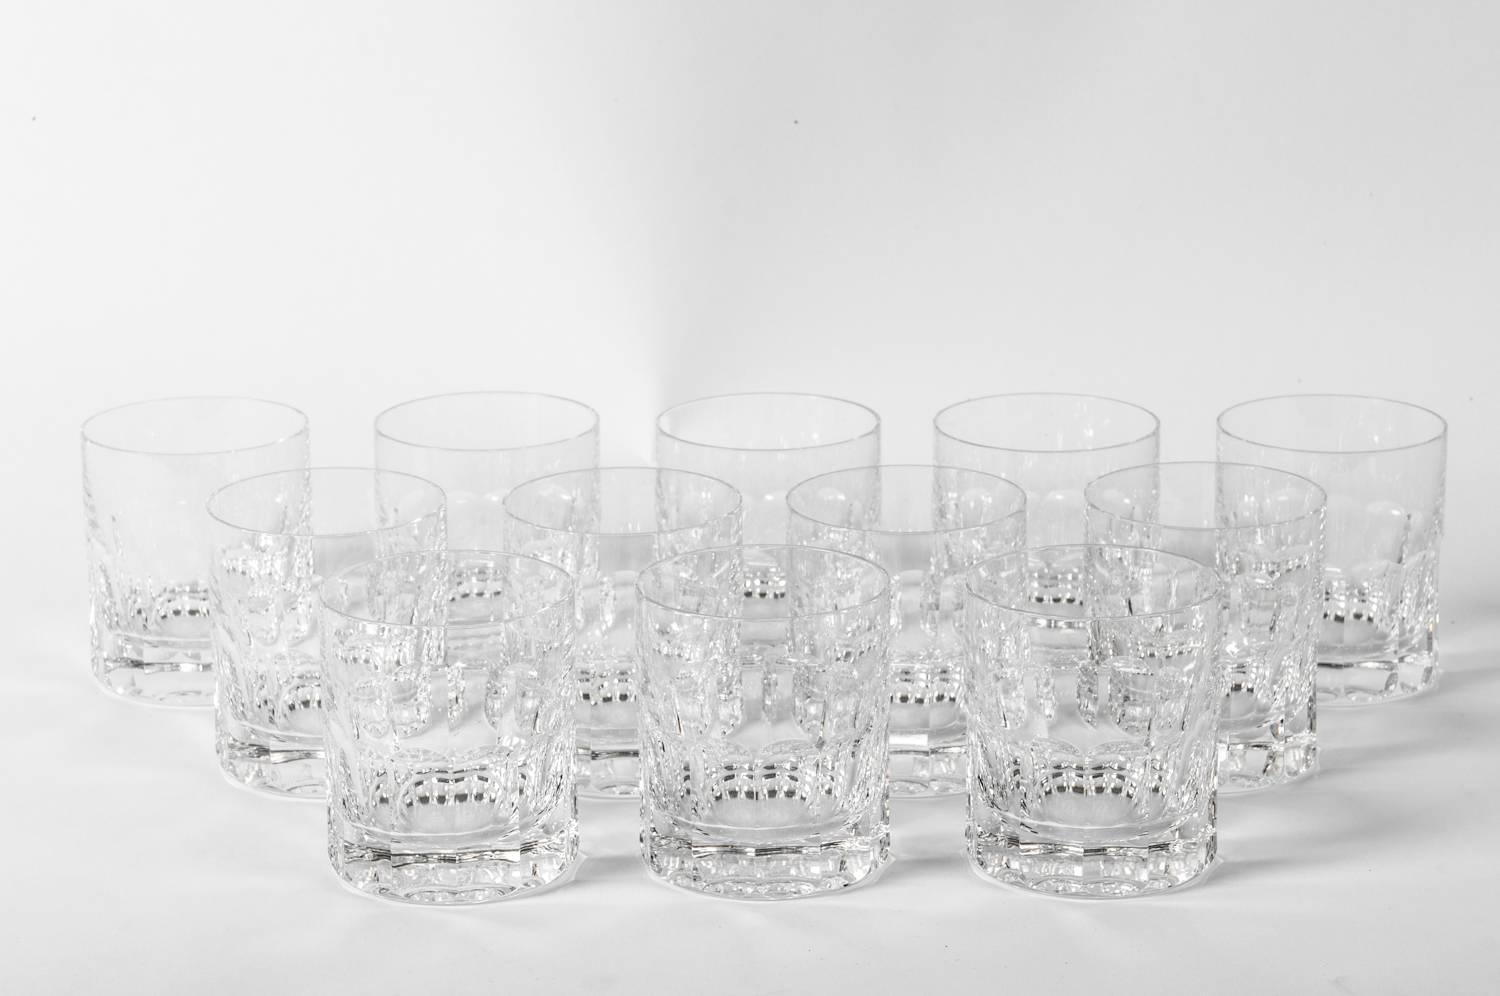 Vintage set of 12 Saint Louis crystal whiskey / scotch glasses. Excellent condition. Each glass measure 3.5 inches high x 3 inches top diameter.